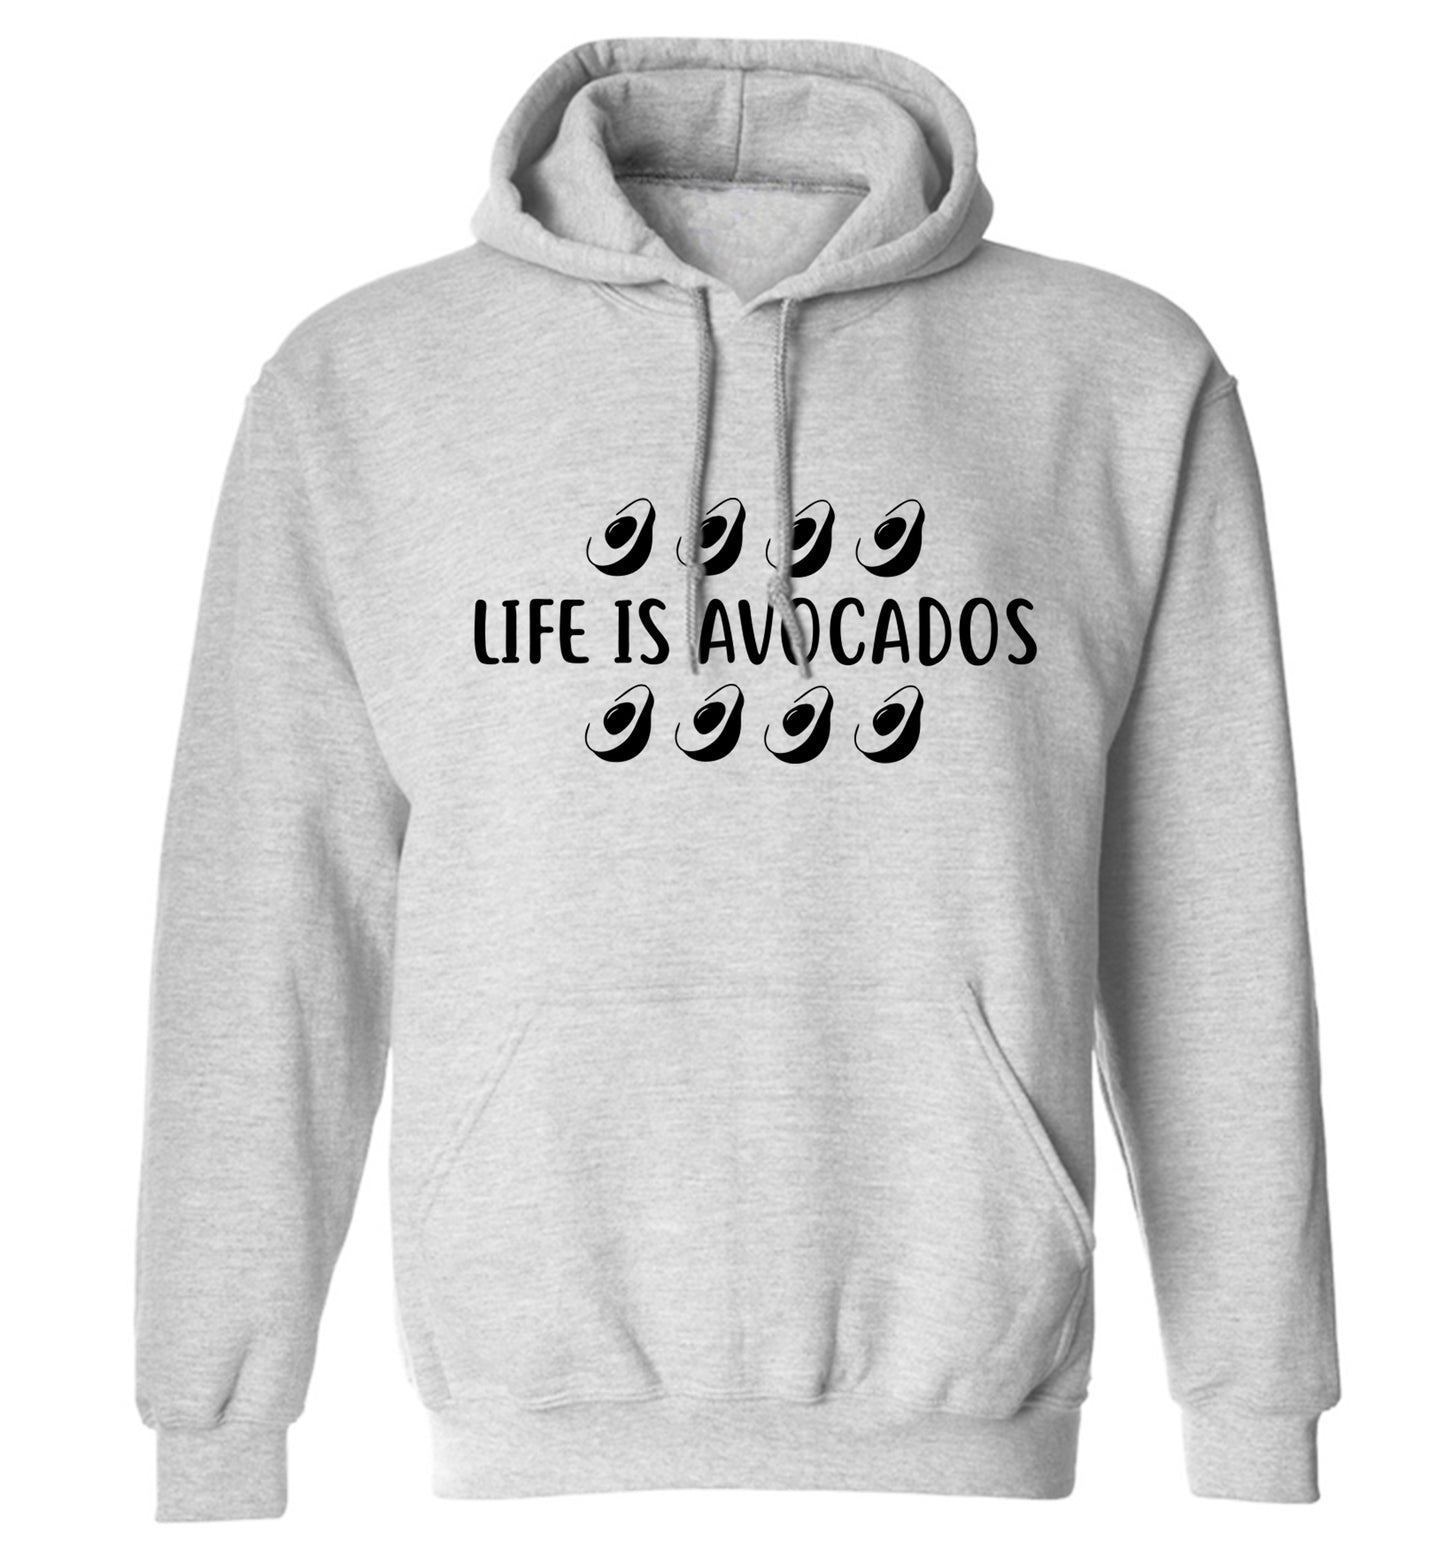 Life is avocados adults unisex grey hoodie 2XL